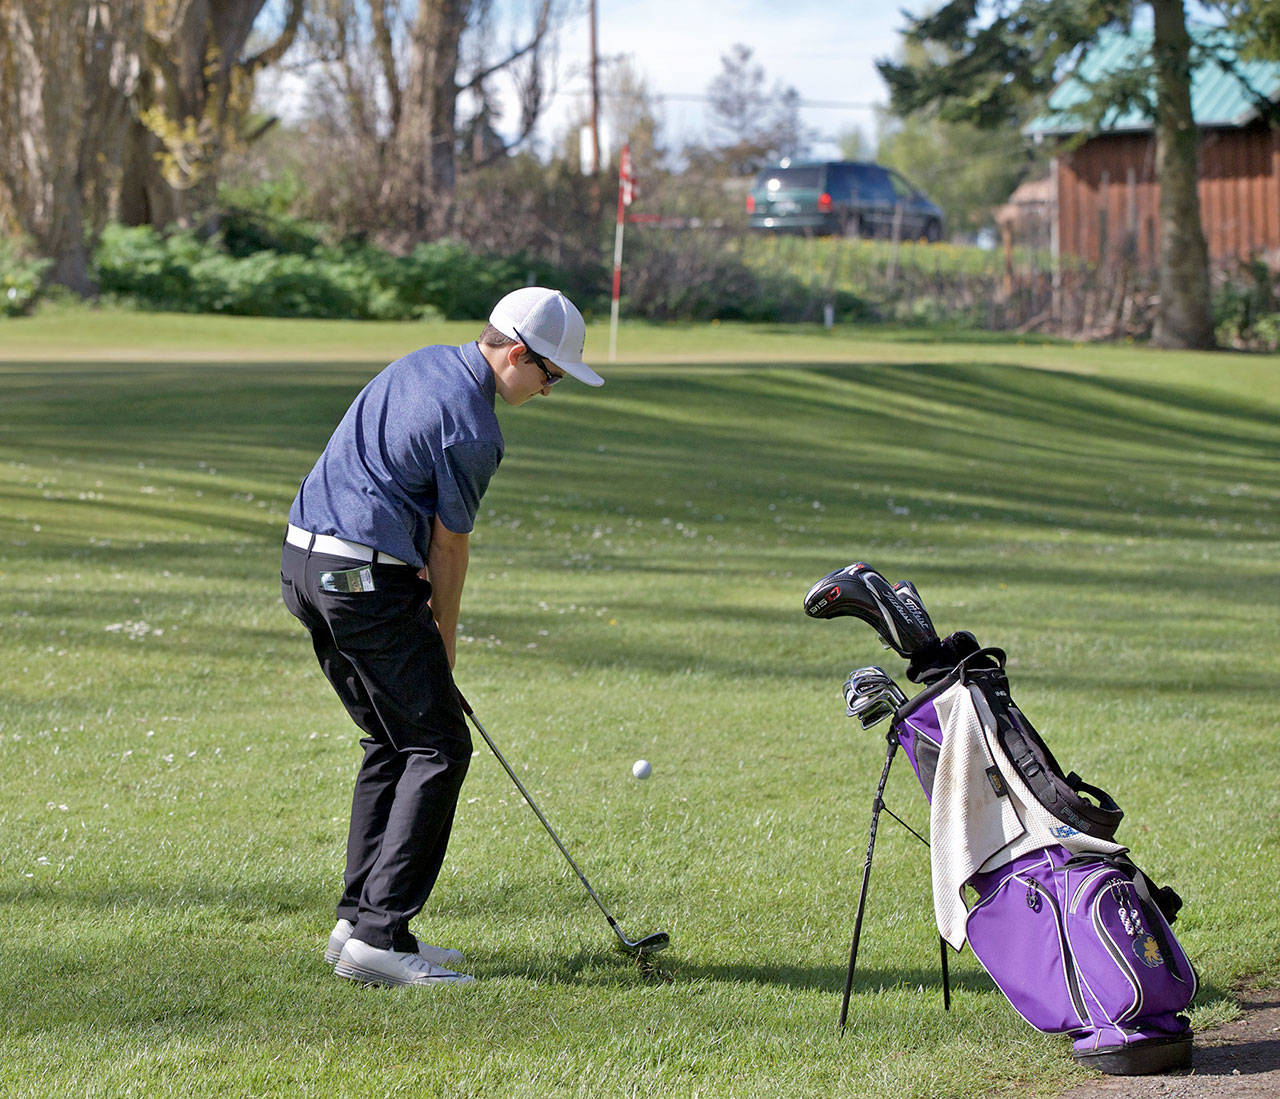 Steve Mullensky/for Peninsula Daily News Sequim’s Paul Jacobsen, chips for the green on the first hole during a match against Port Townsend at Port Townsend Golf Club.